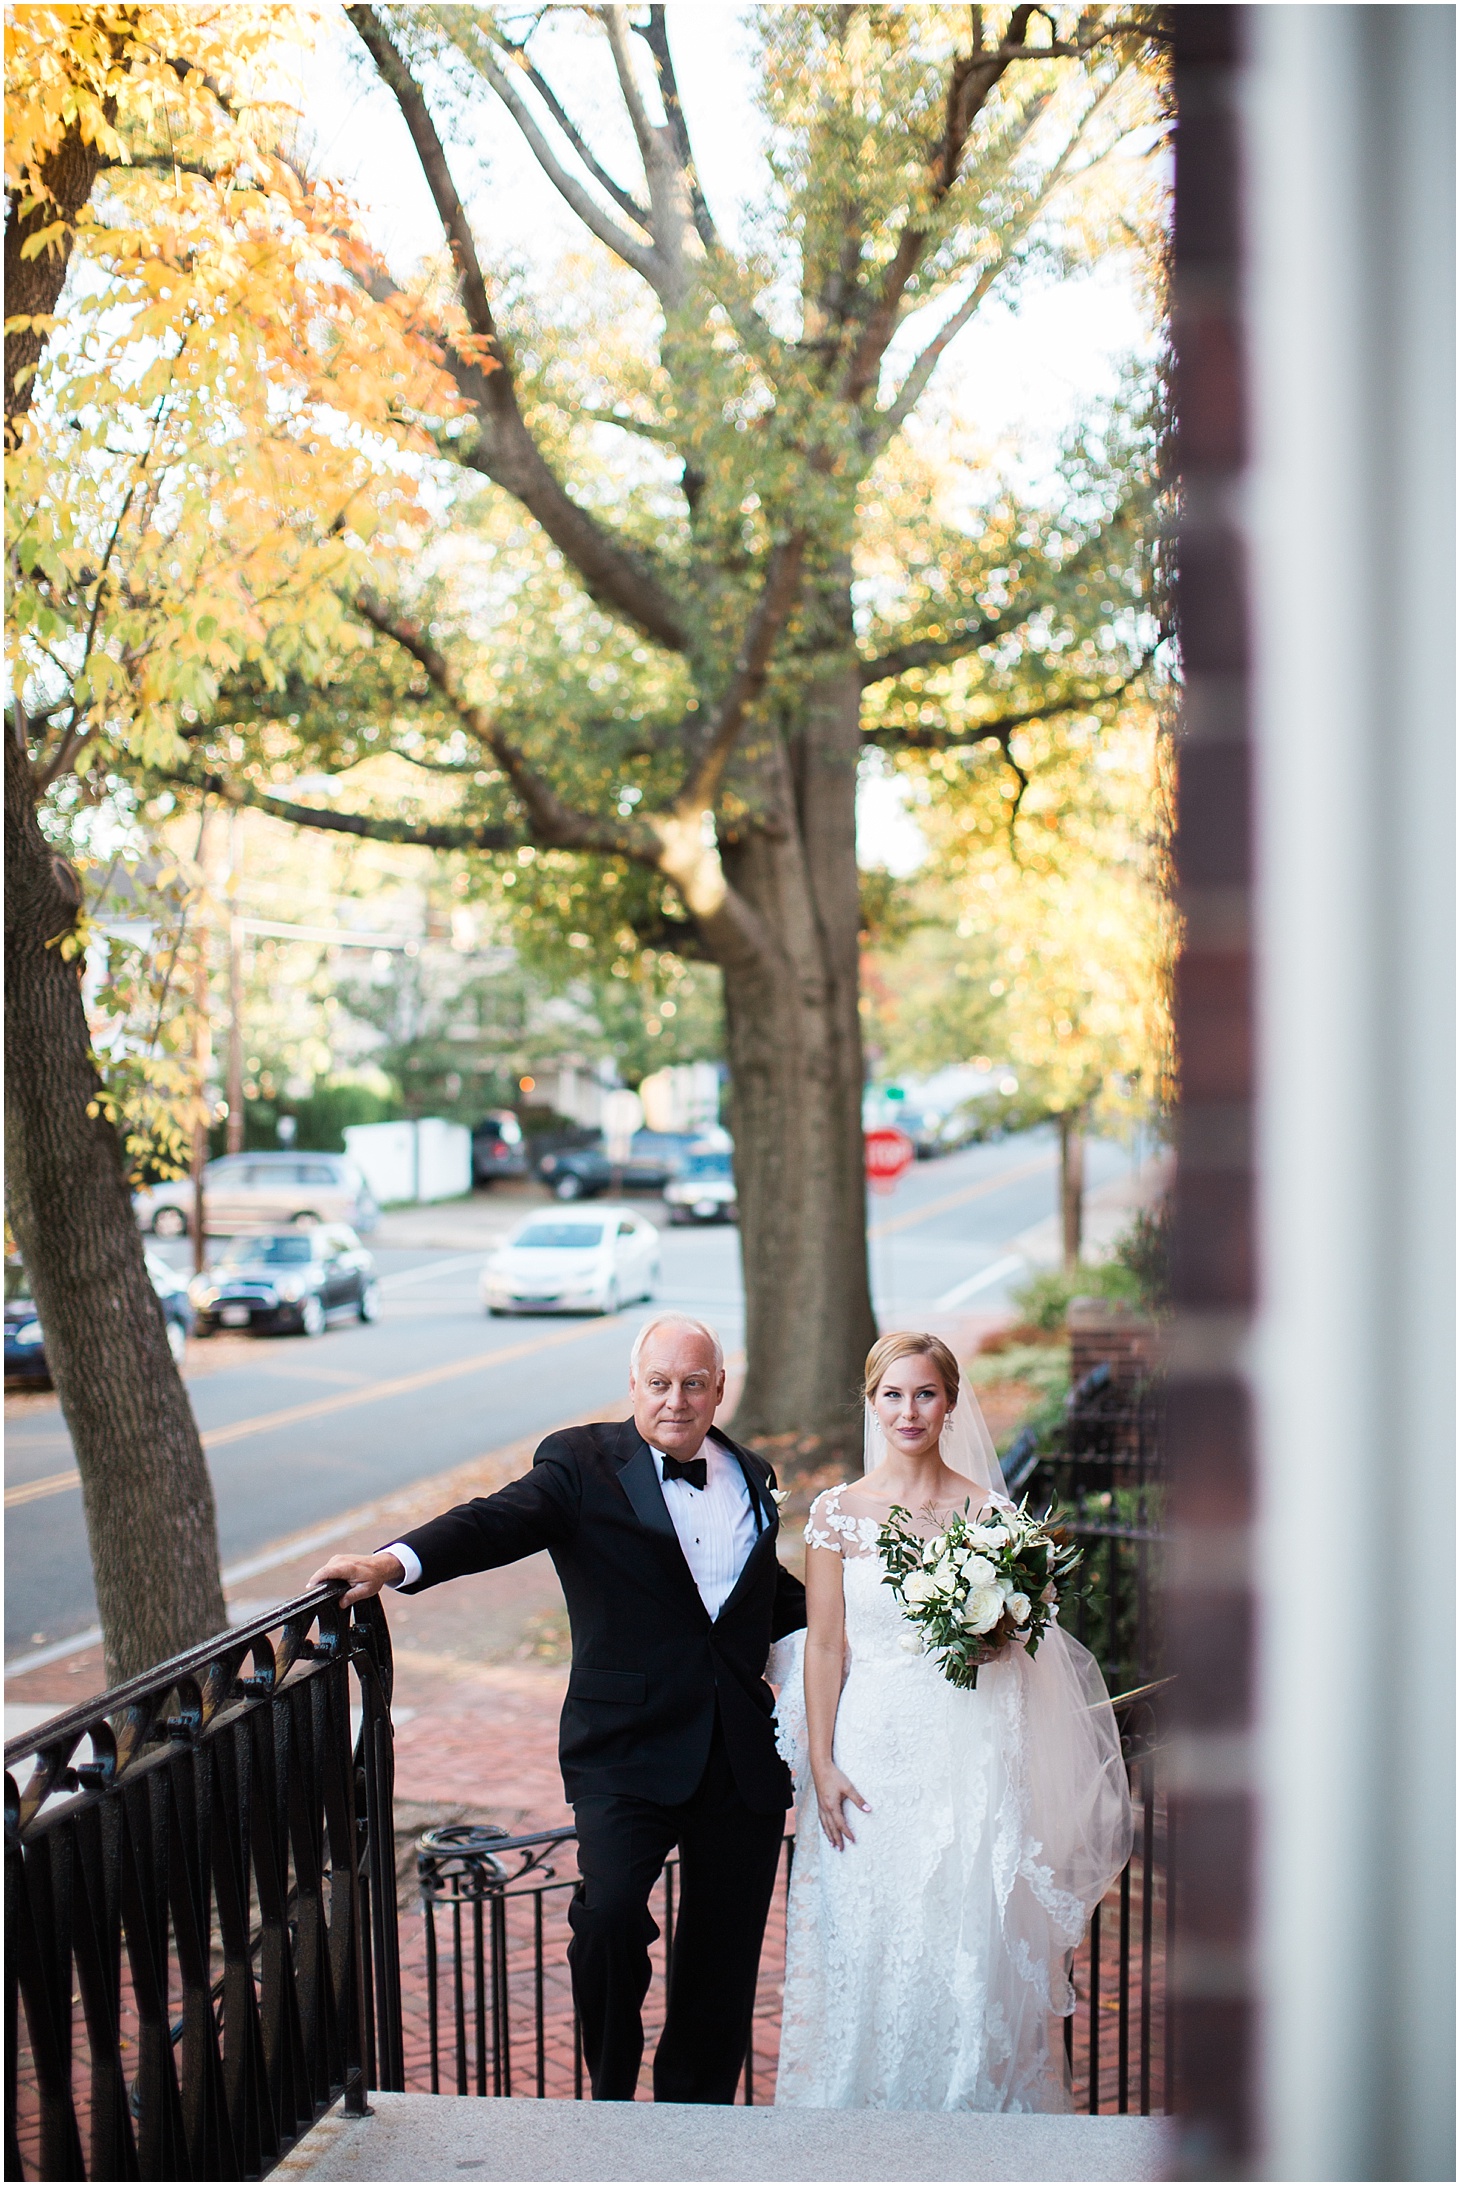 Old Presbyterian Meeting House Wedding | Southern Black Tie wedding at St. Regis DC in Dusty Blue and Ivory | Sarah Bradshaw Photography